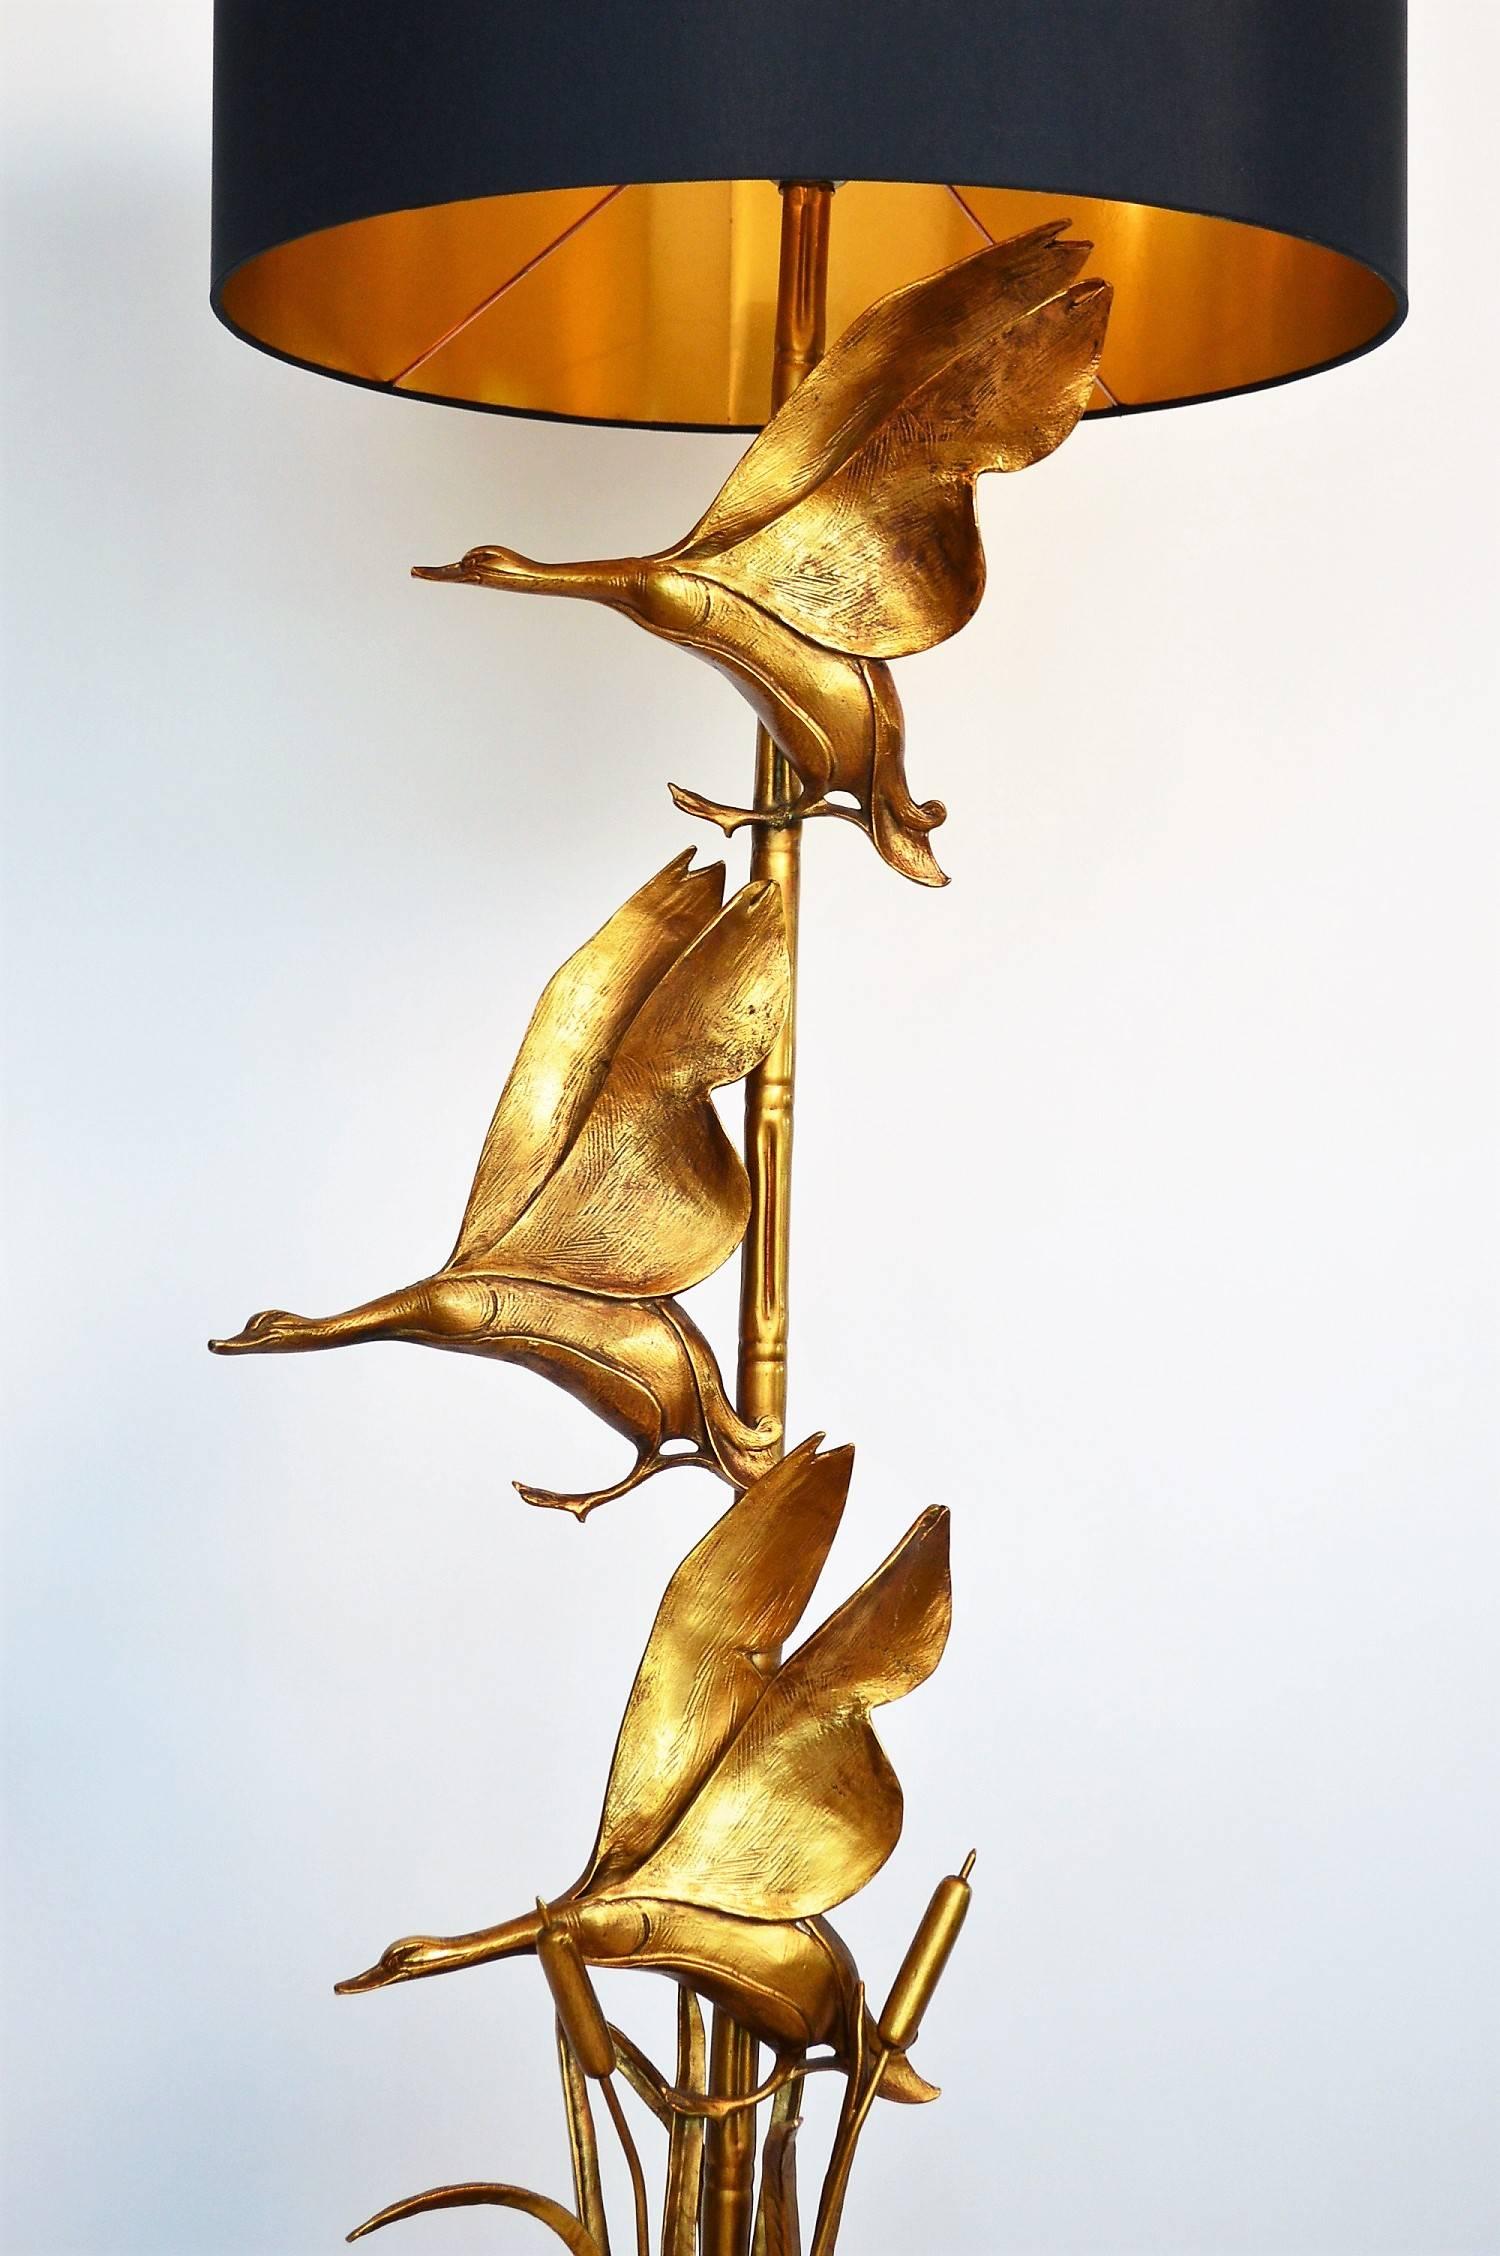 Extraordinary decorative floor lamp made of brass with black wooden pedestral.
The lamp body consists of a brass tube in bamboo optics, which is mounted on the pedestal. On this tube are three ducks (in brass) in flight. Among the ducks reed and